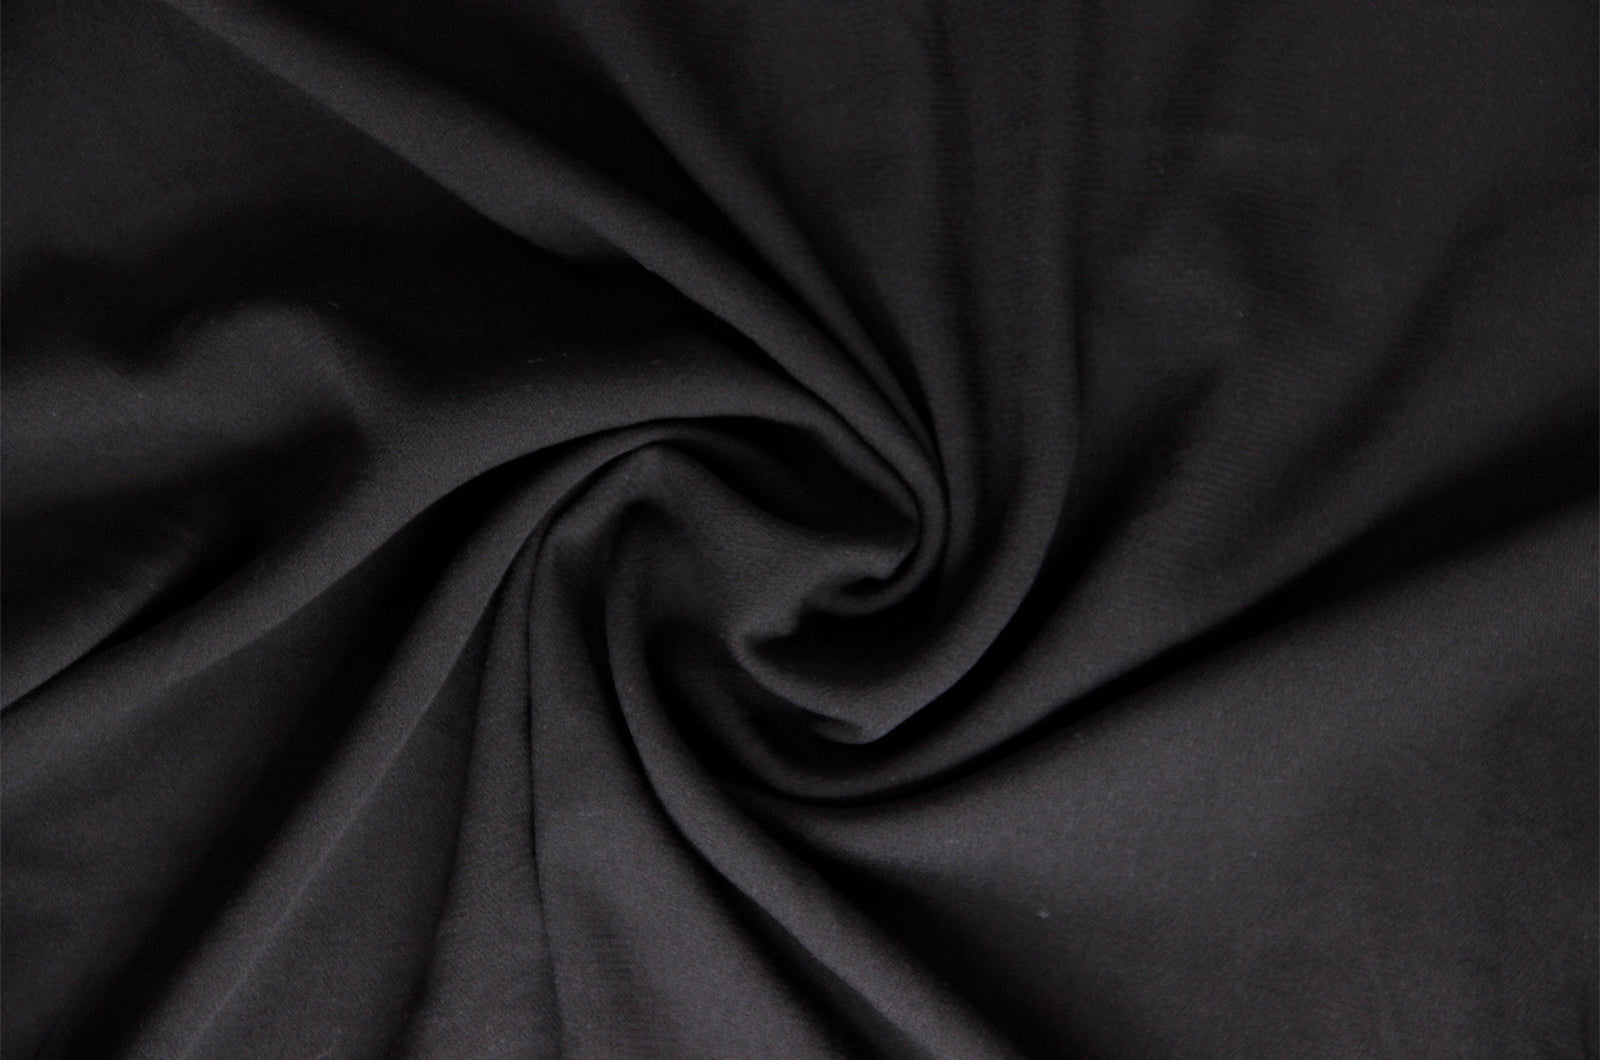 Viscose crepe * From 50 cm-27